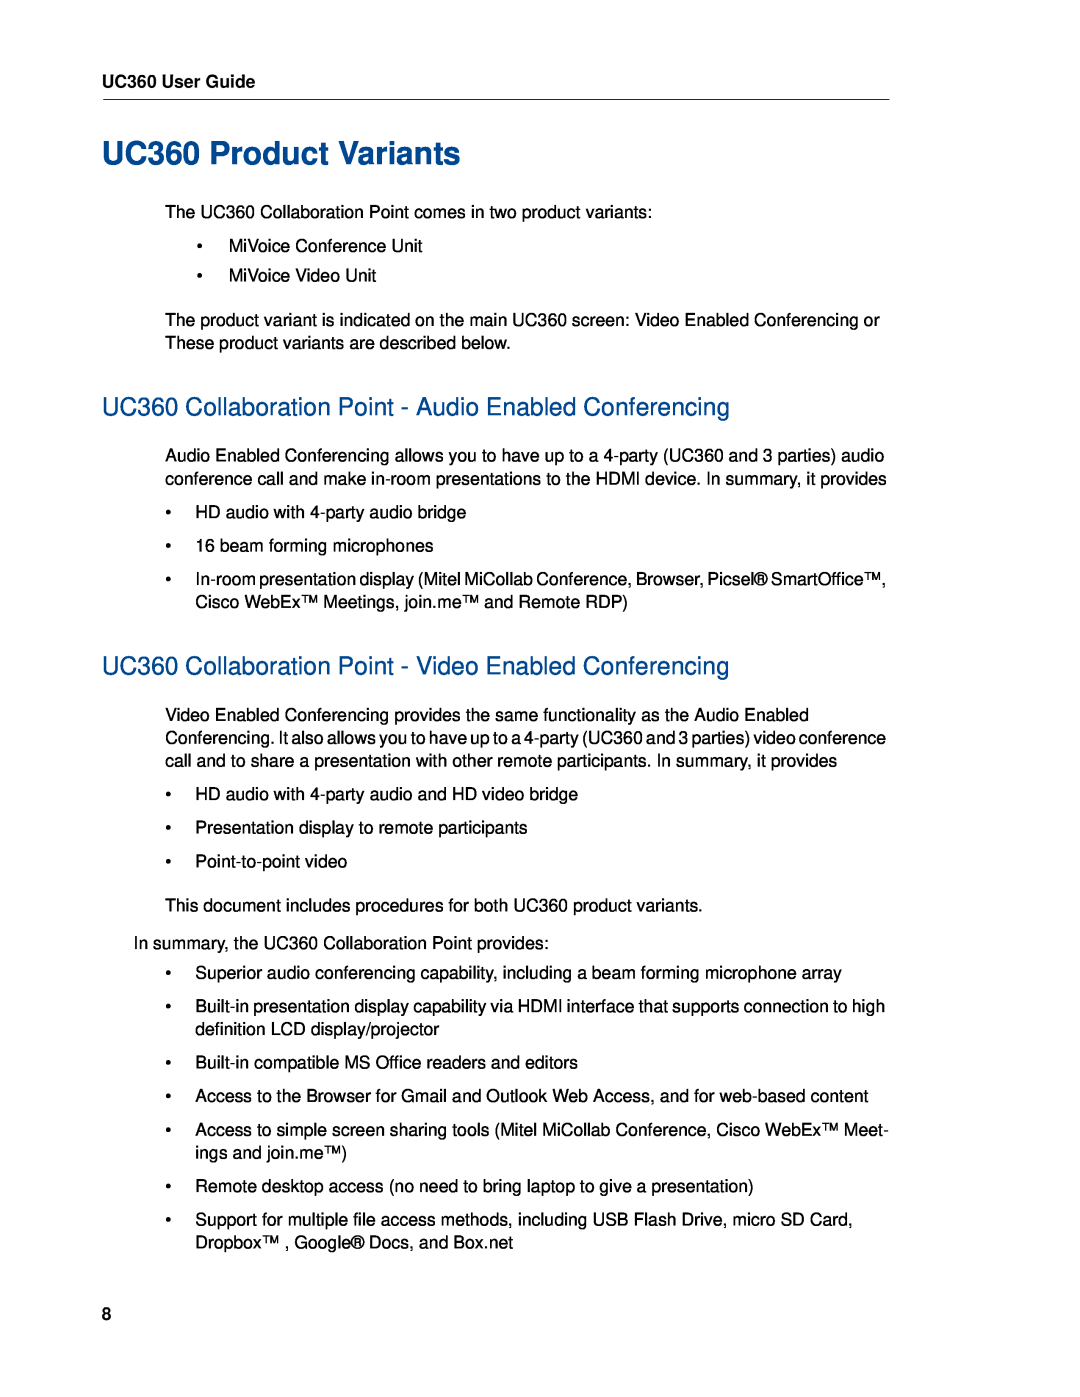 Mitel manual UC360 Product Variants, UC360 Collaboration Point - Audio Enabled Conferencing 